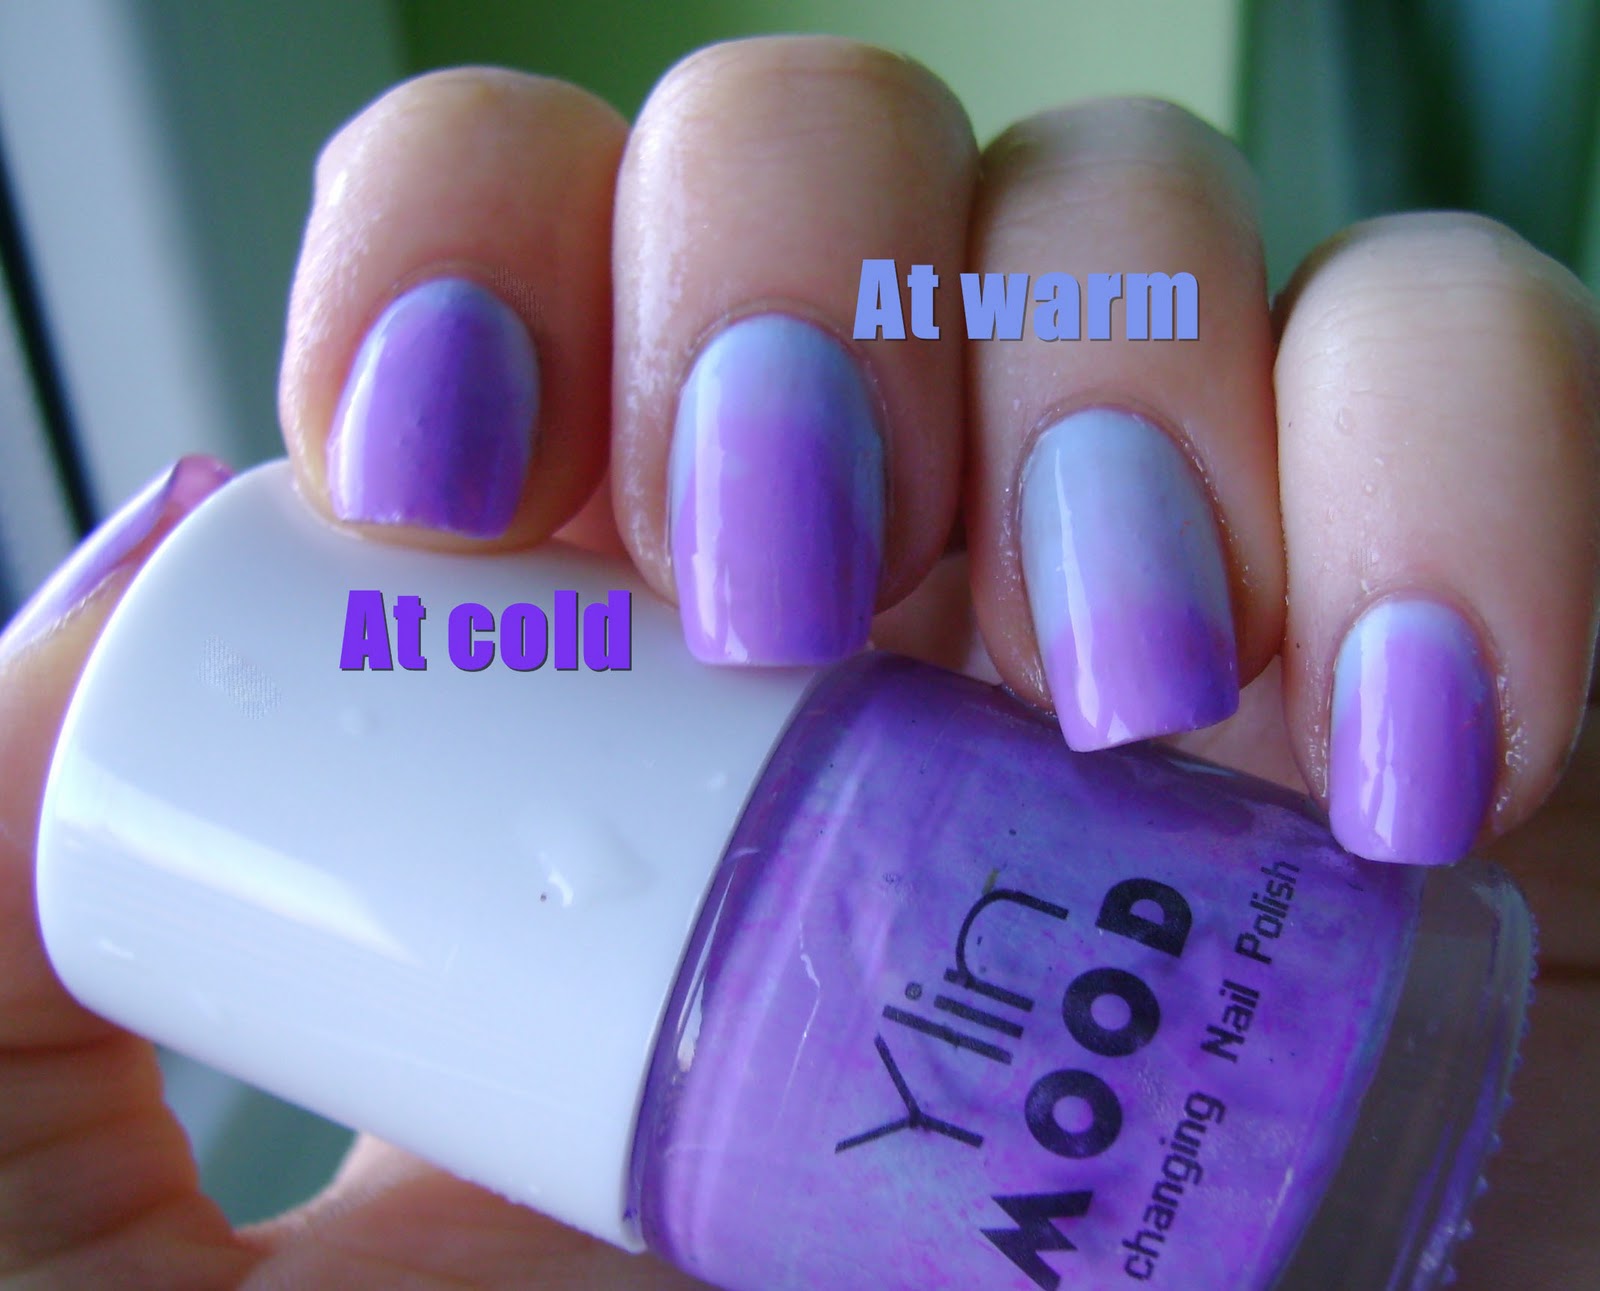 3. Essie Color Changing Nail Polish - wide 2